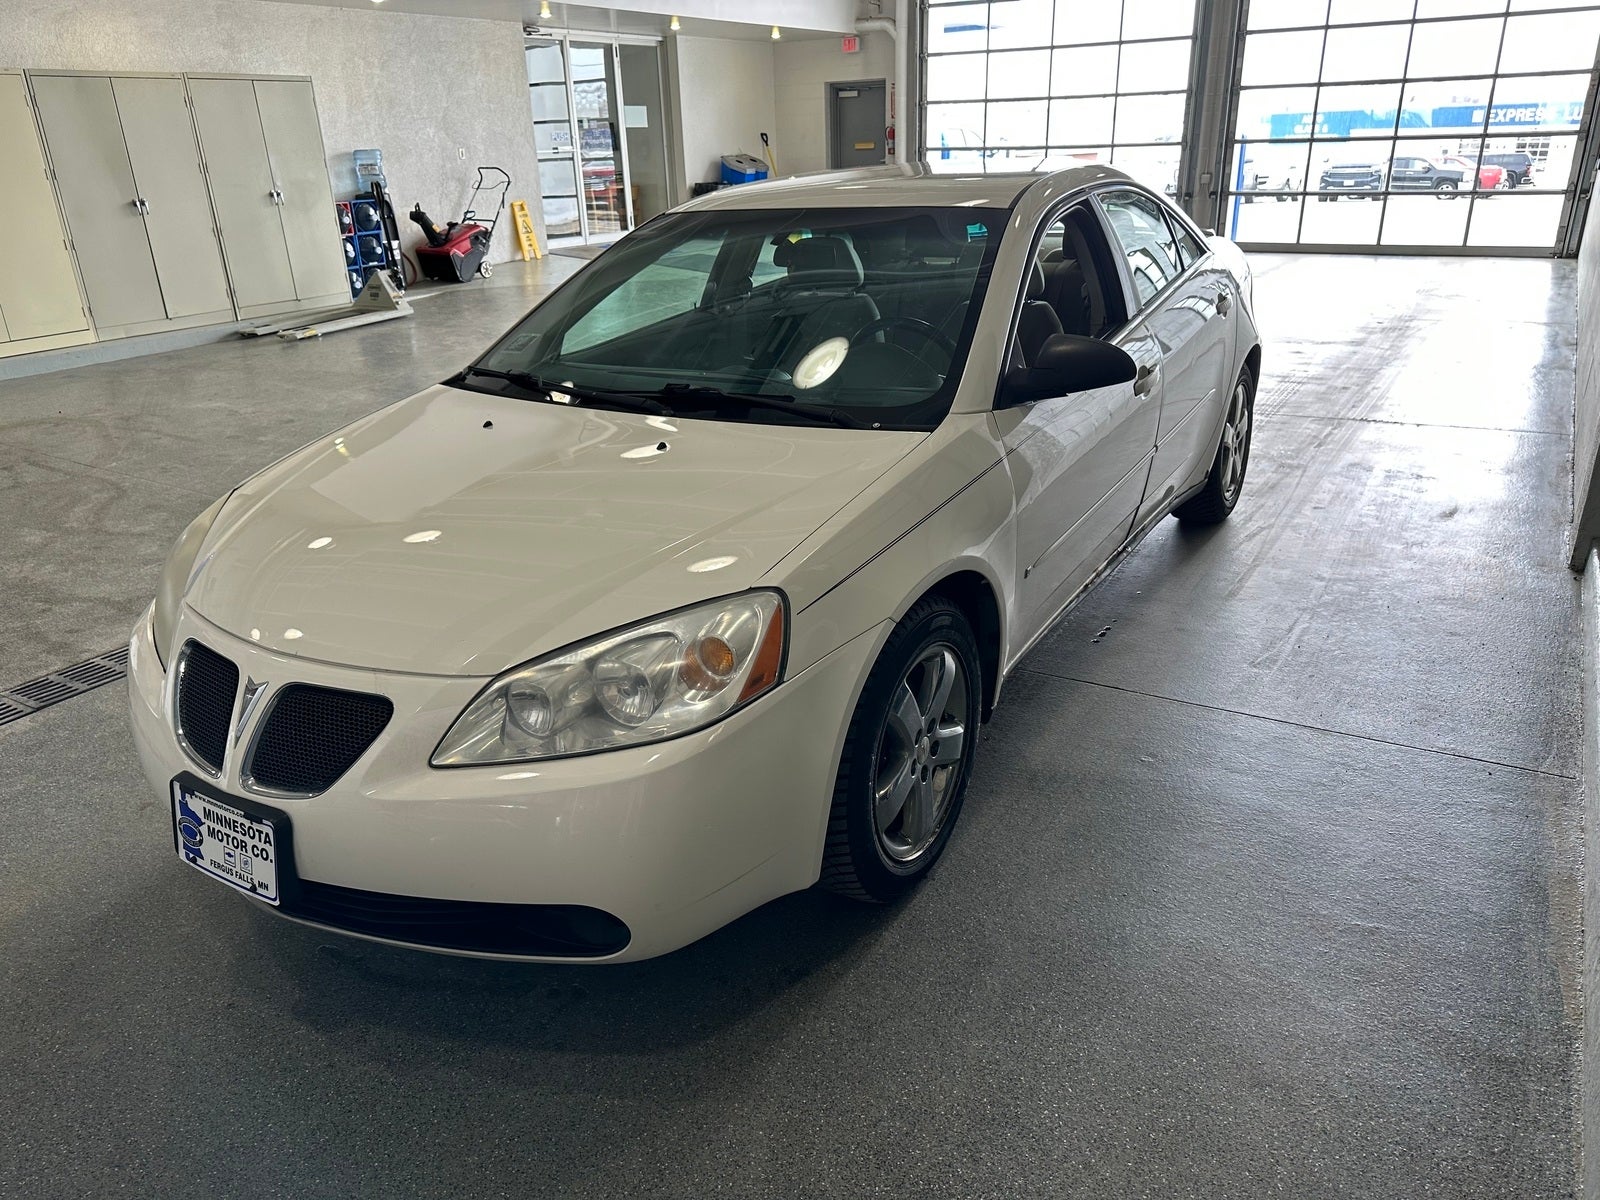 Used 2007 Pontiac G6 GT with VIN 1G2ZH58N674167712 for sale in Fergus Falls, Minnesota